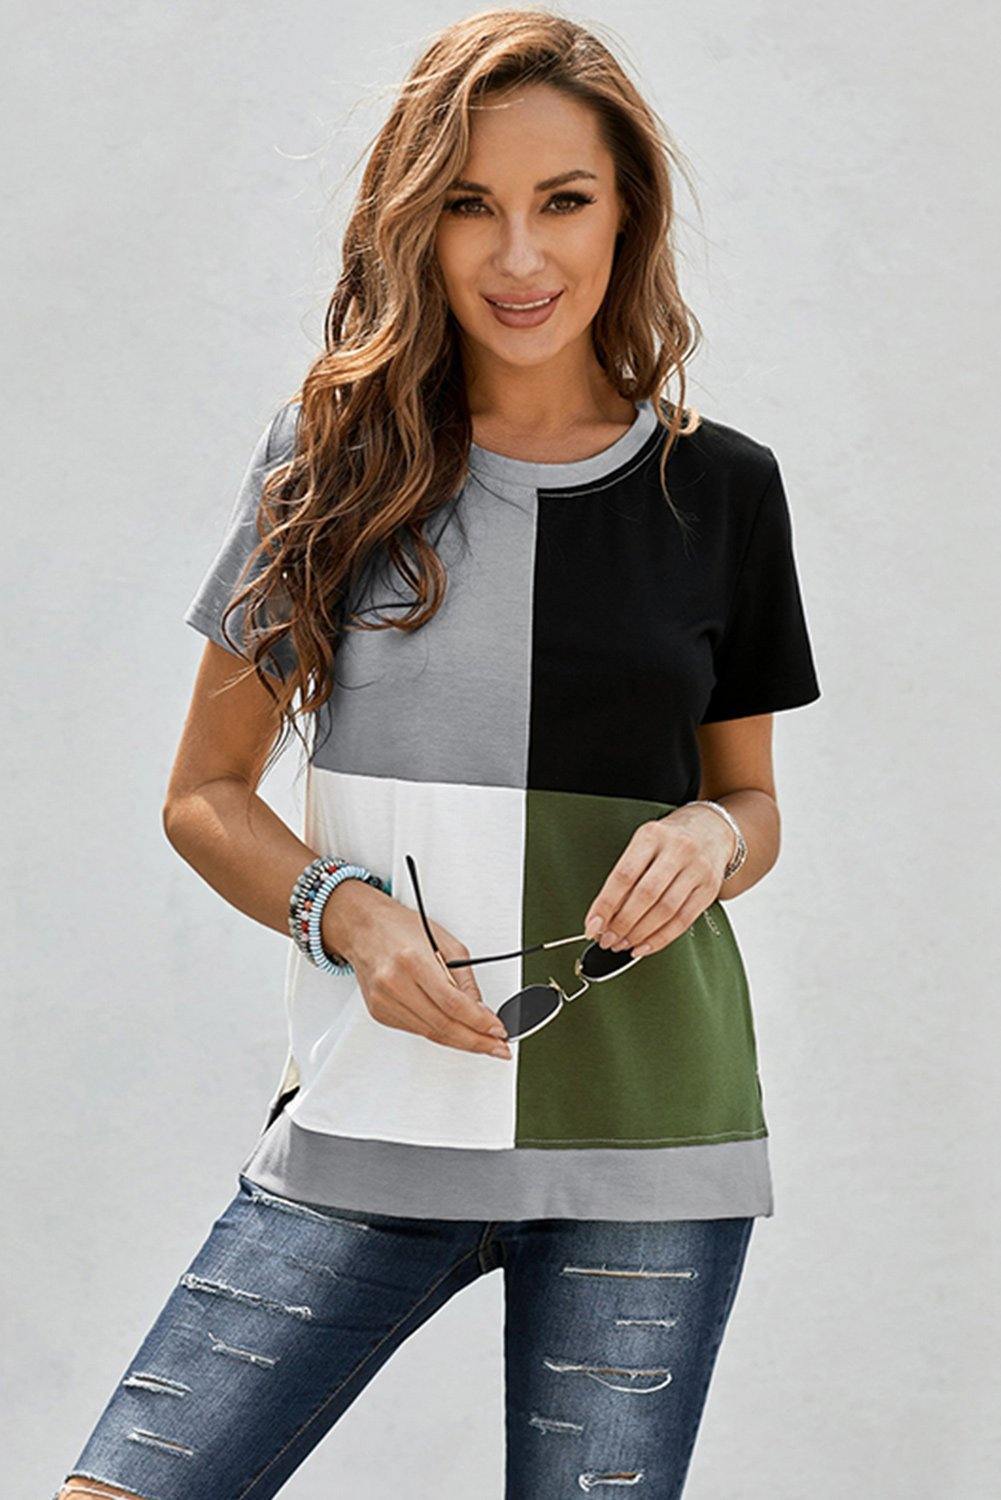 Wine Red Colorblock T-shirt with Slits - L & M Kee, LLC